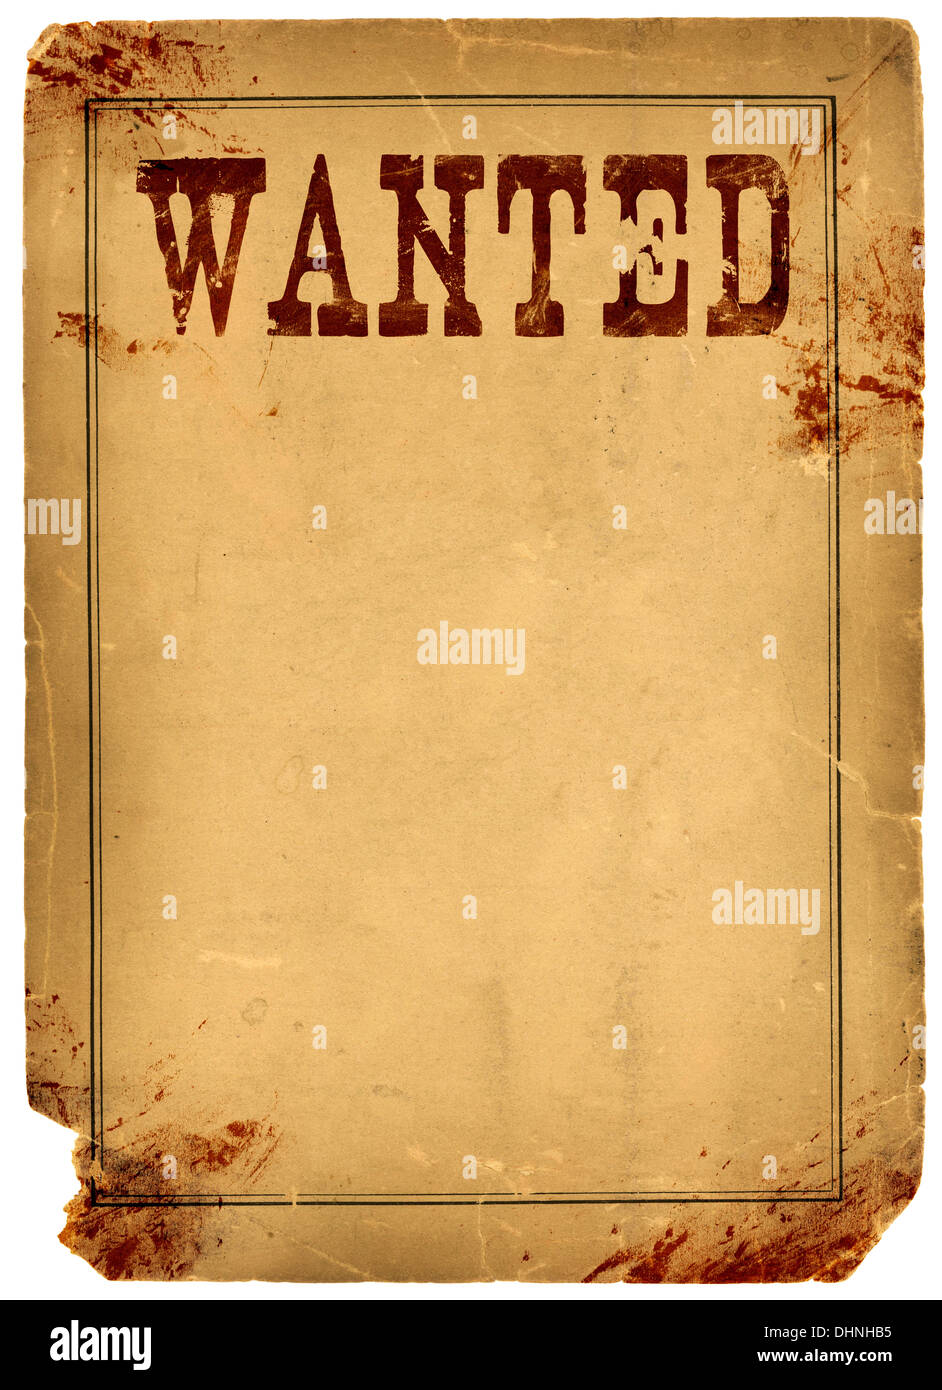 Old Time Wanted Poster Template ~ Photoshop Tutorial: How To Make An ...